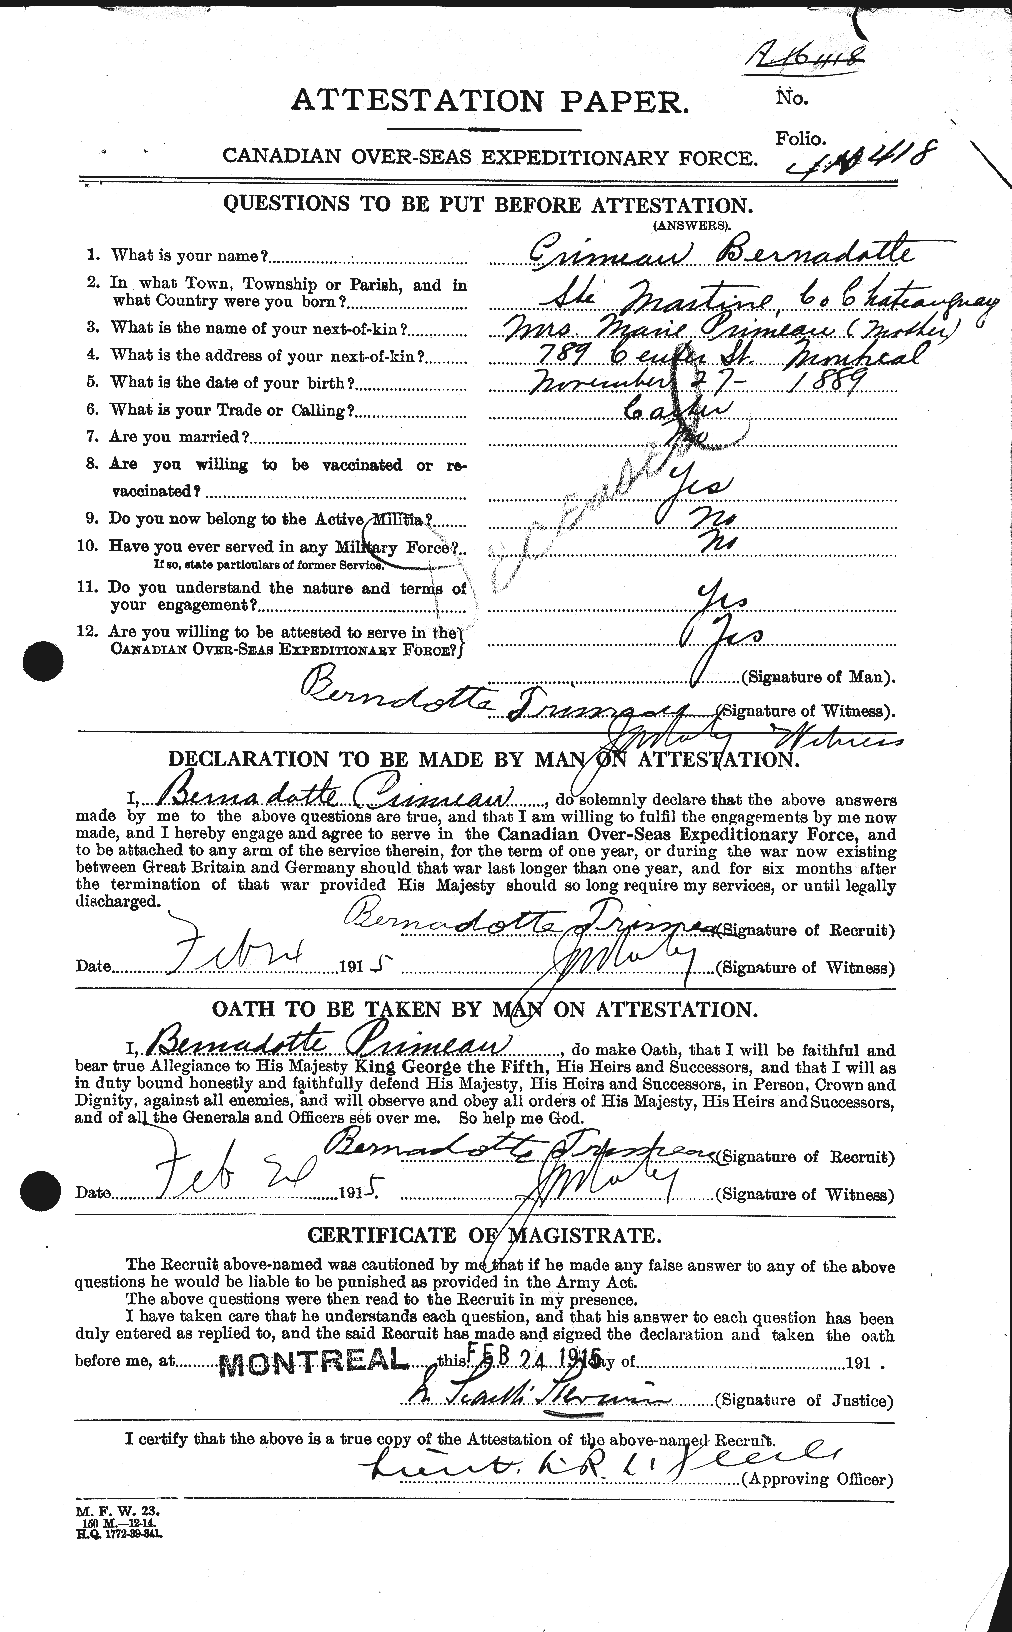 Personnel Records of the First World War - CEF 586112a